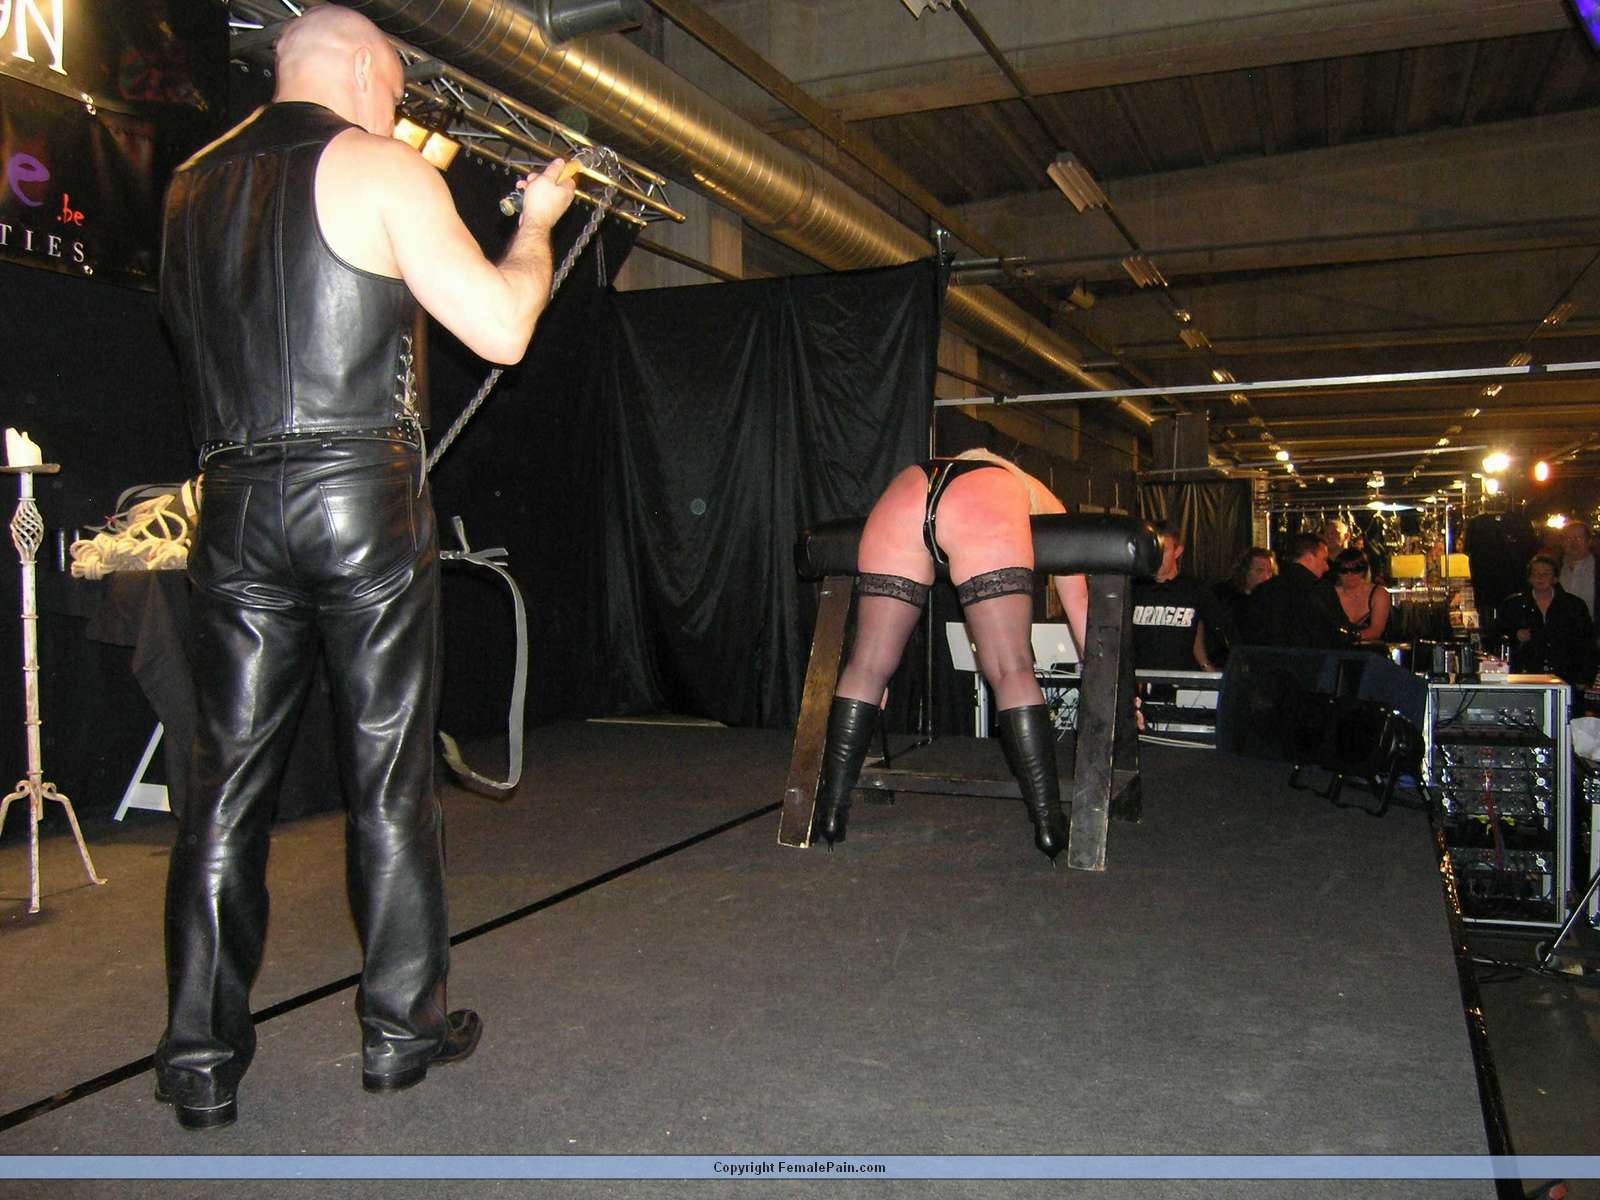 Caning Stocks - Public Humiliation And Punishments | Hell Inferno Humiliation